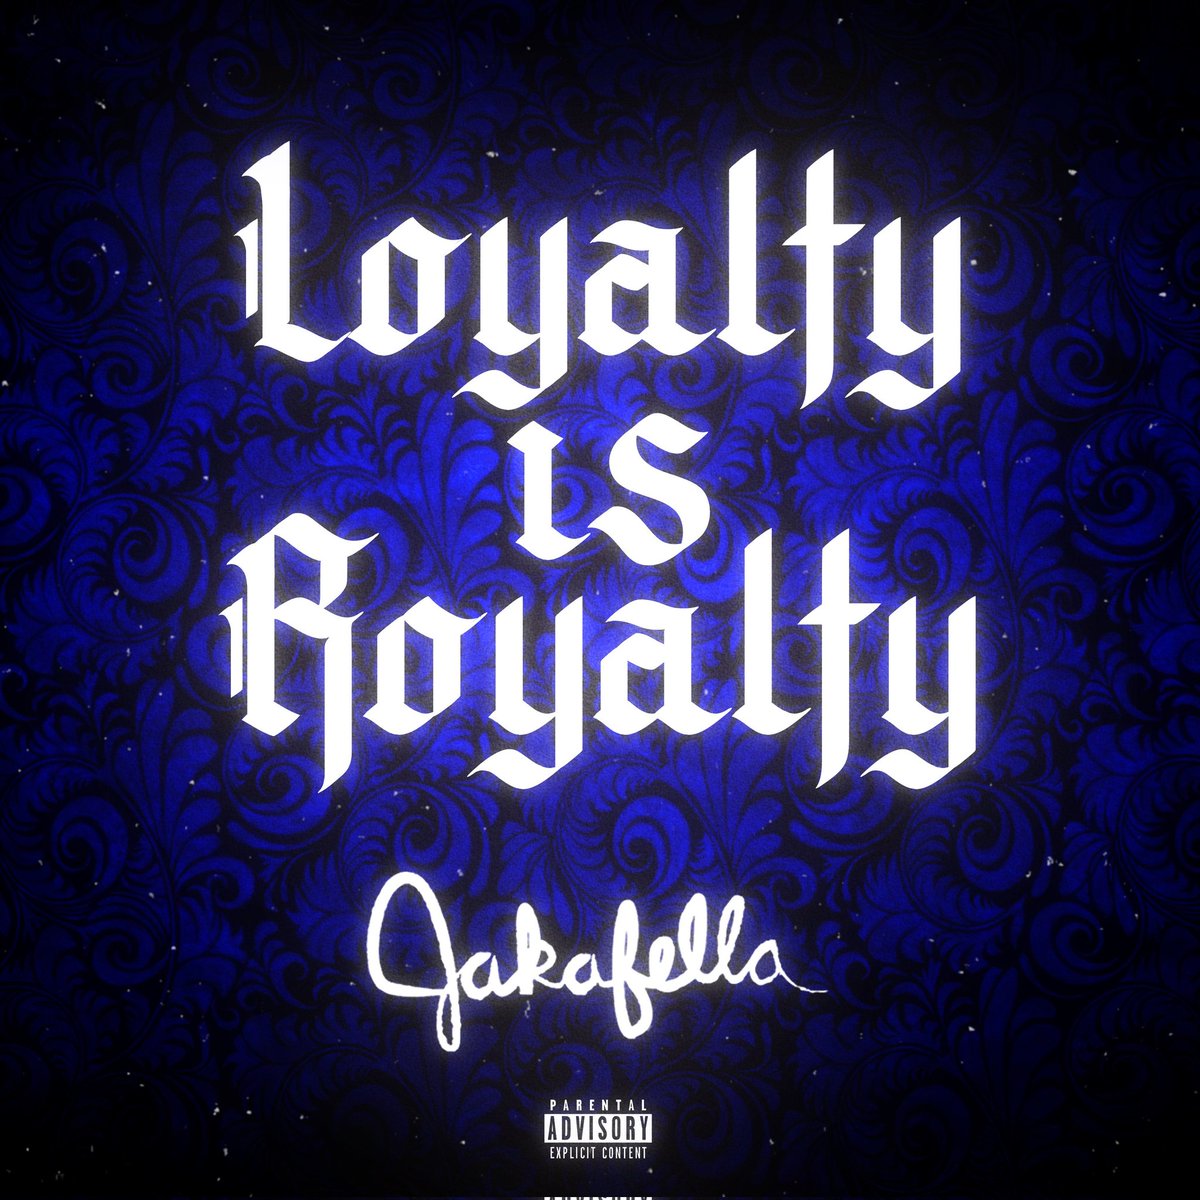 Right here is my 2nd single droppin tomorrow May 26th and I promise y'all I'm in my bag on this one. Back on dat Jake The Flake shit but as Jakafella!!!! This one goin Hood Platinum without a doubt. #teamjakafella #jakafella #jakafellent #LoyaltyIsRoyalty #hoodplatinum #Legend